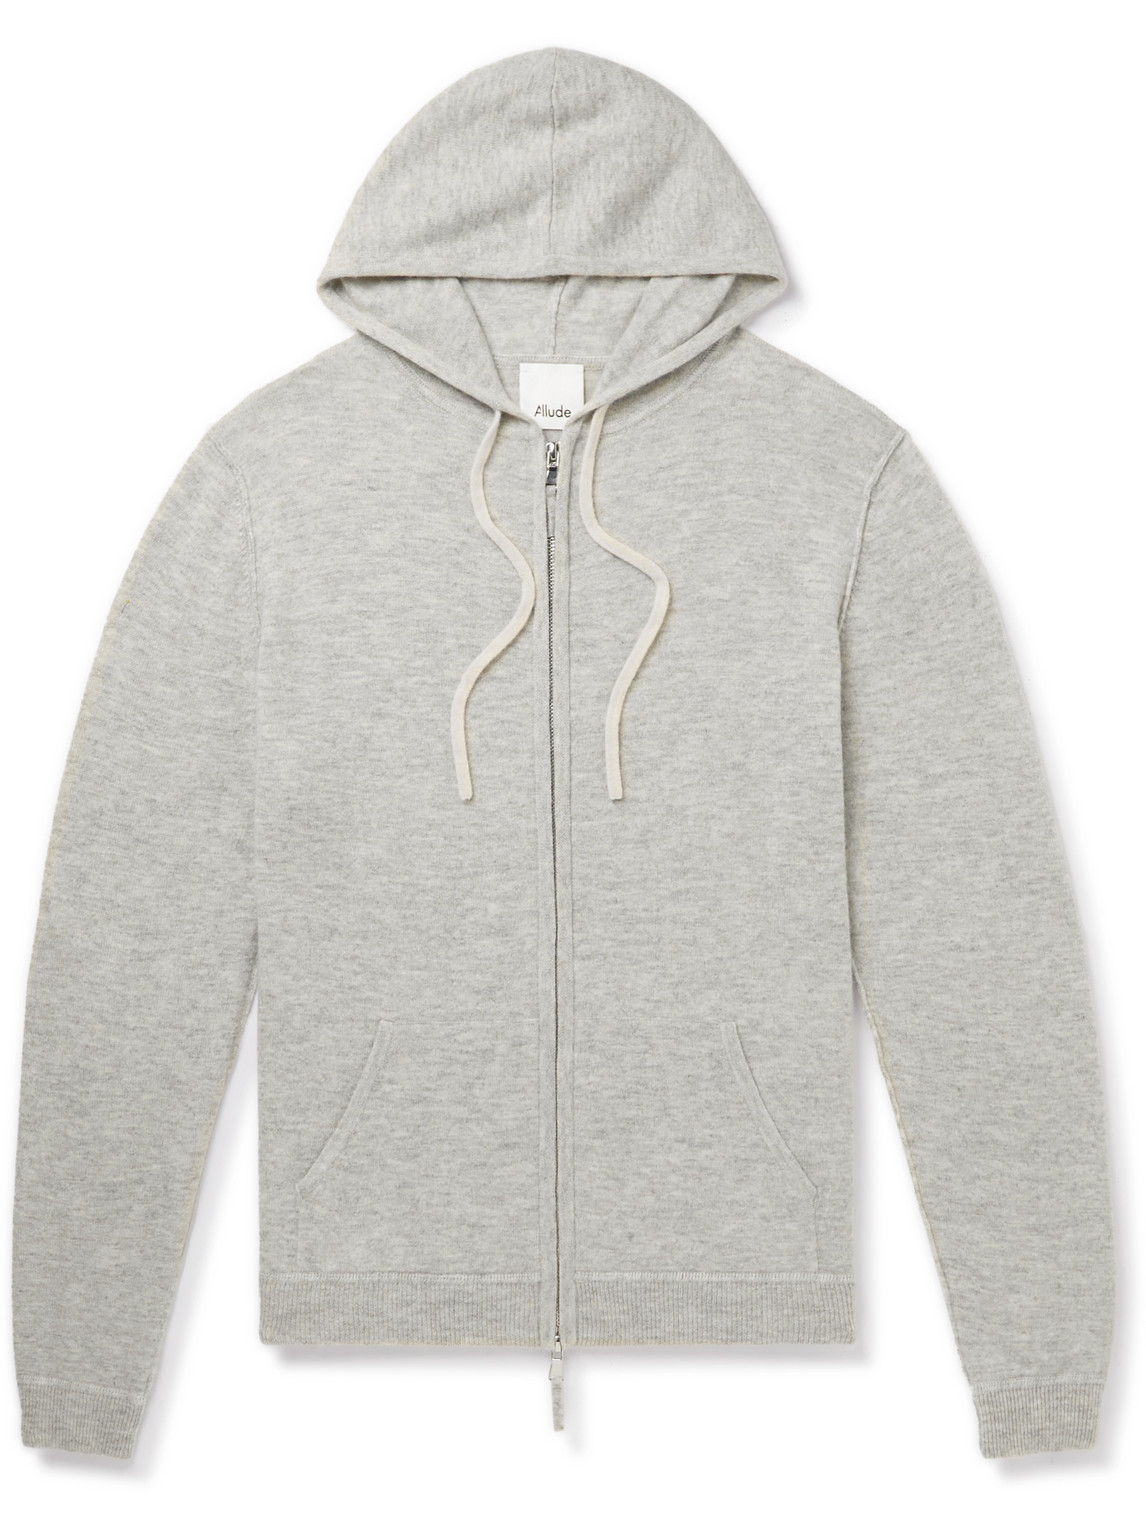 Allude Virgin Wool And Cashmere Blend Zip-up Hoodie In Gray